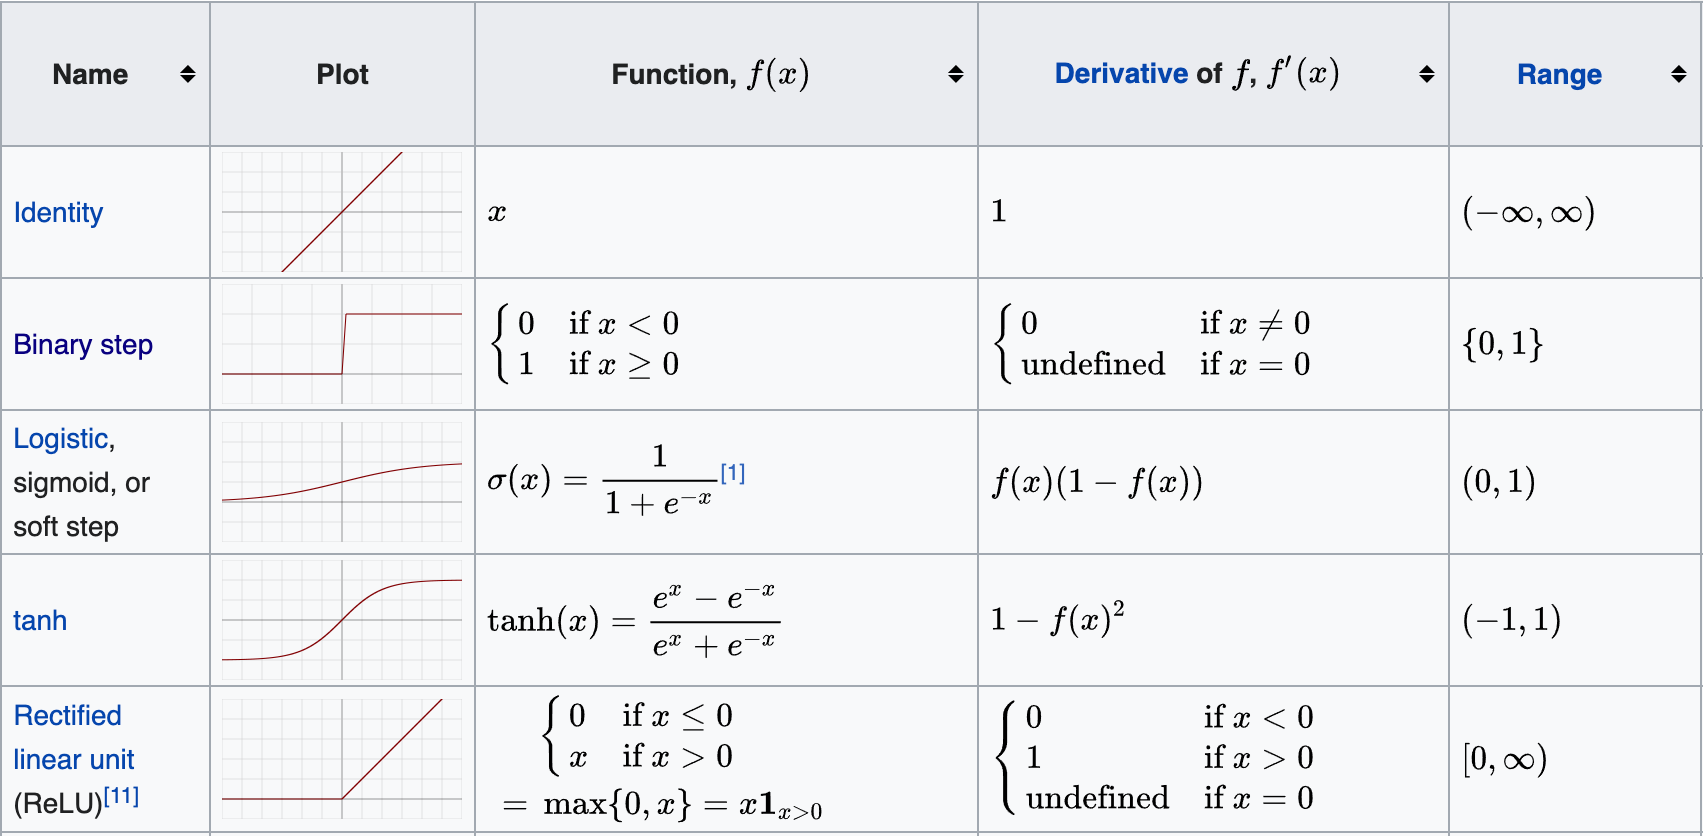 Table showing the formula, graph, derivative, and range of common activation functions. 